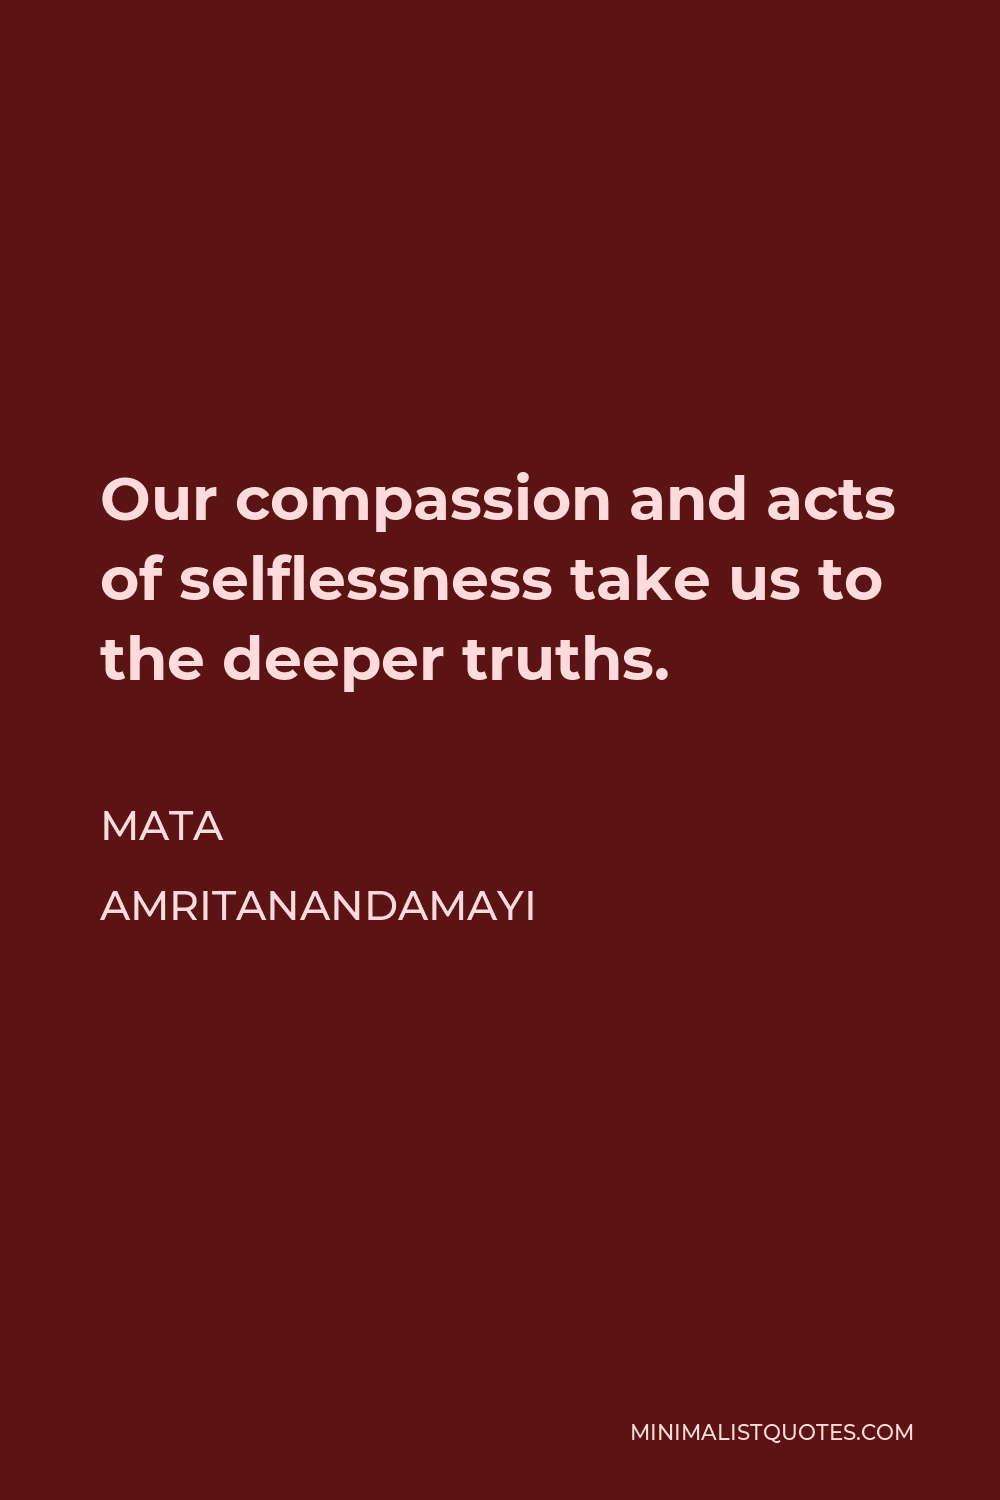 Mata Amritanandamayi Quote - Our compassion and acts of selflessness take us to the deeper truths.